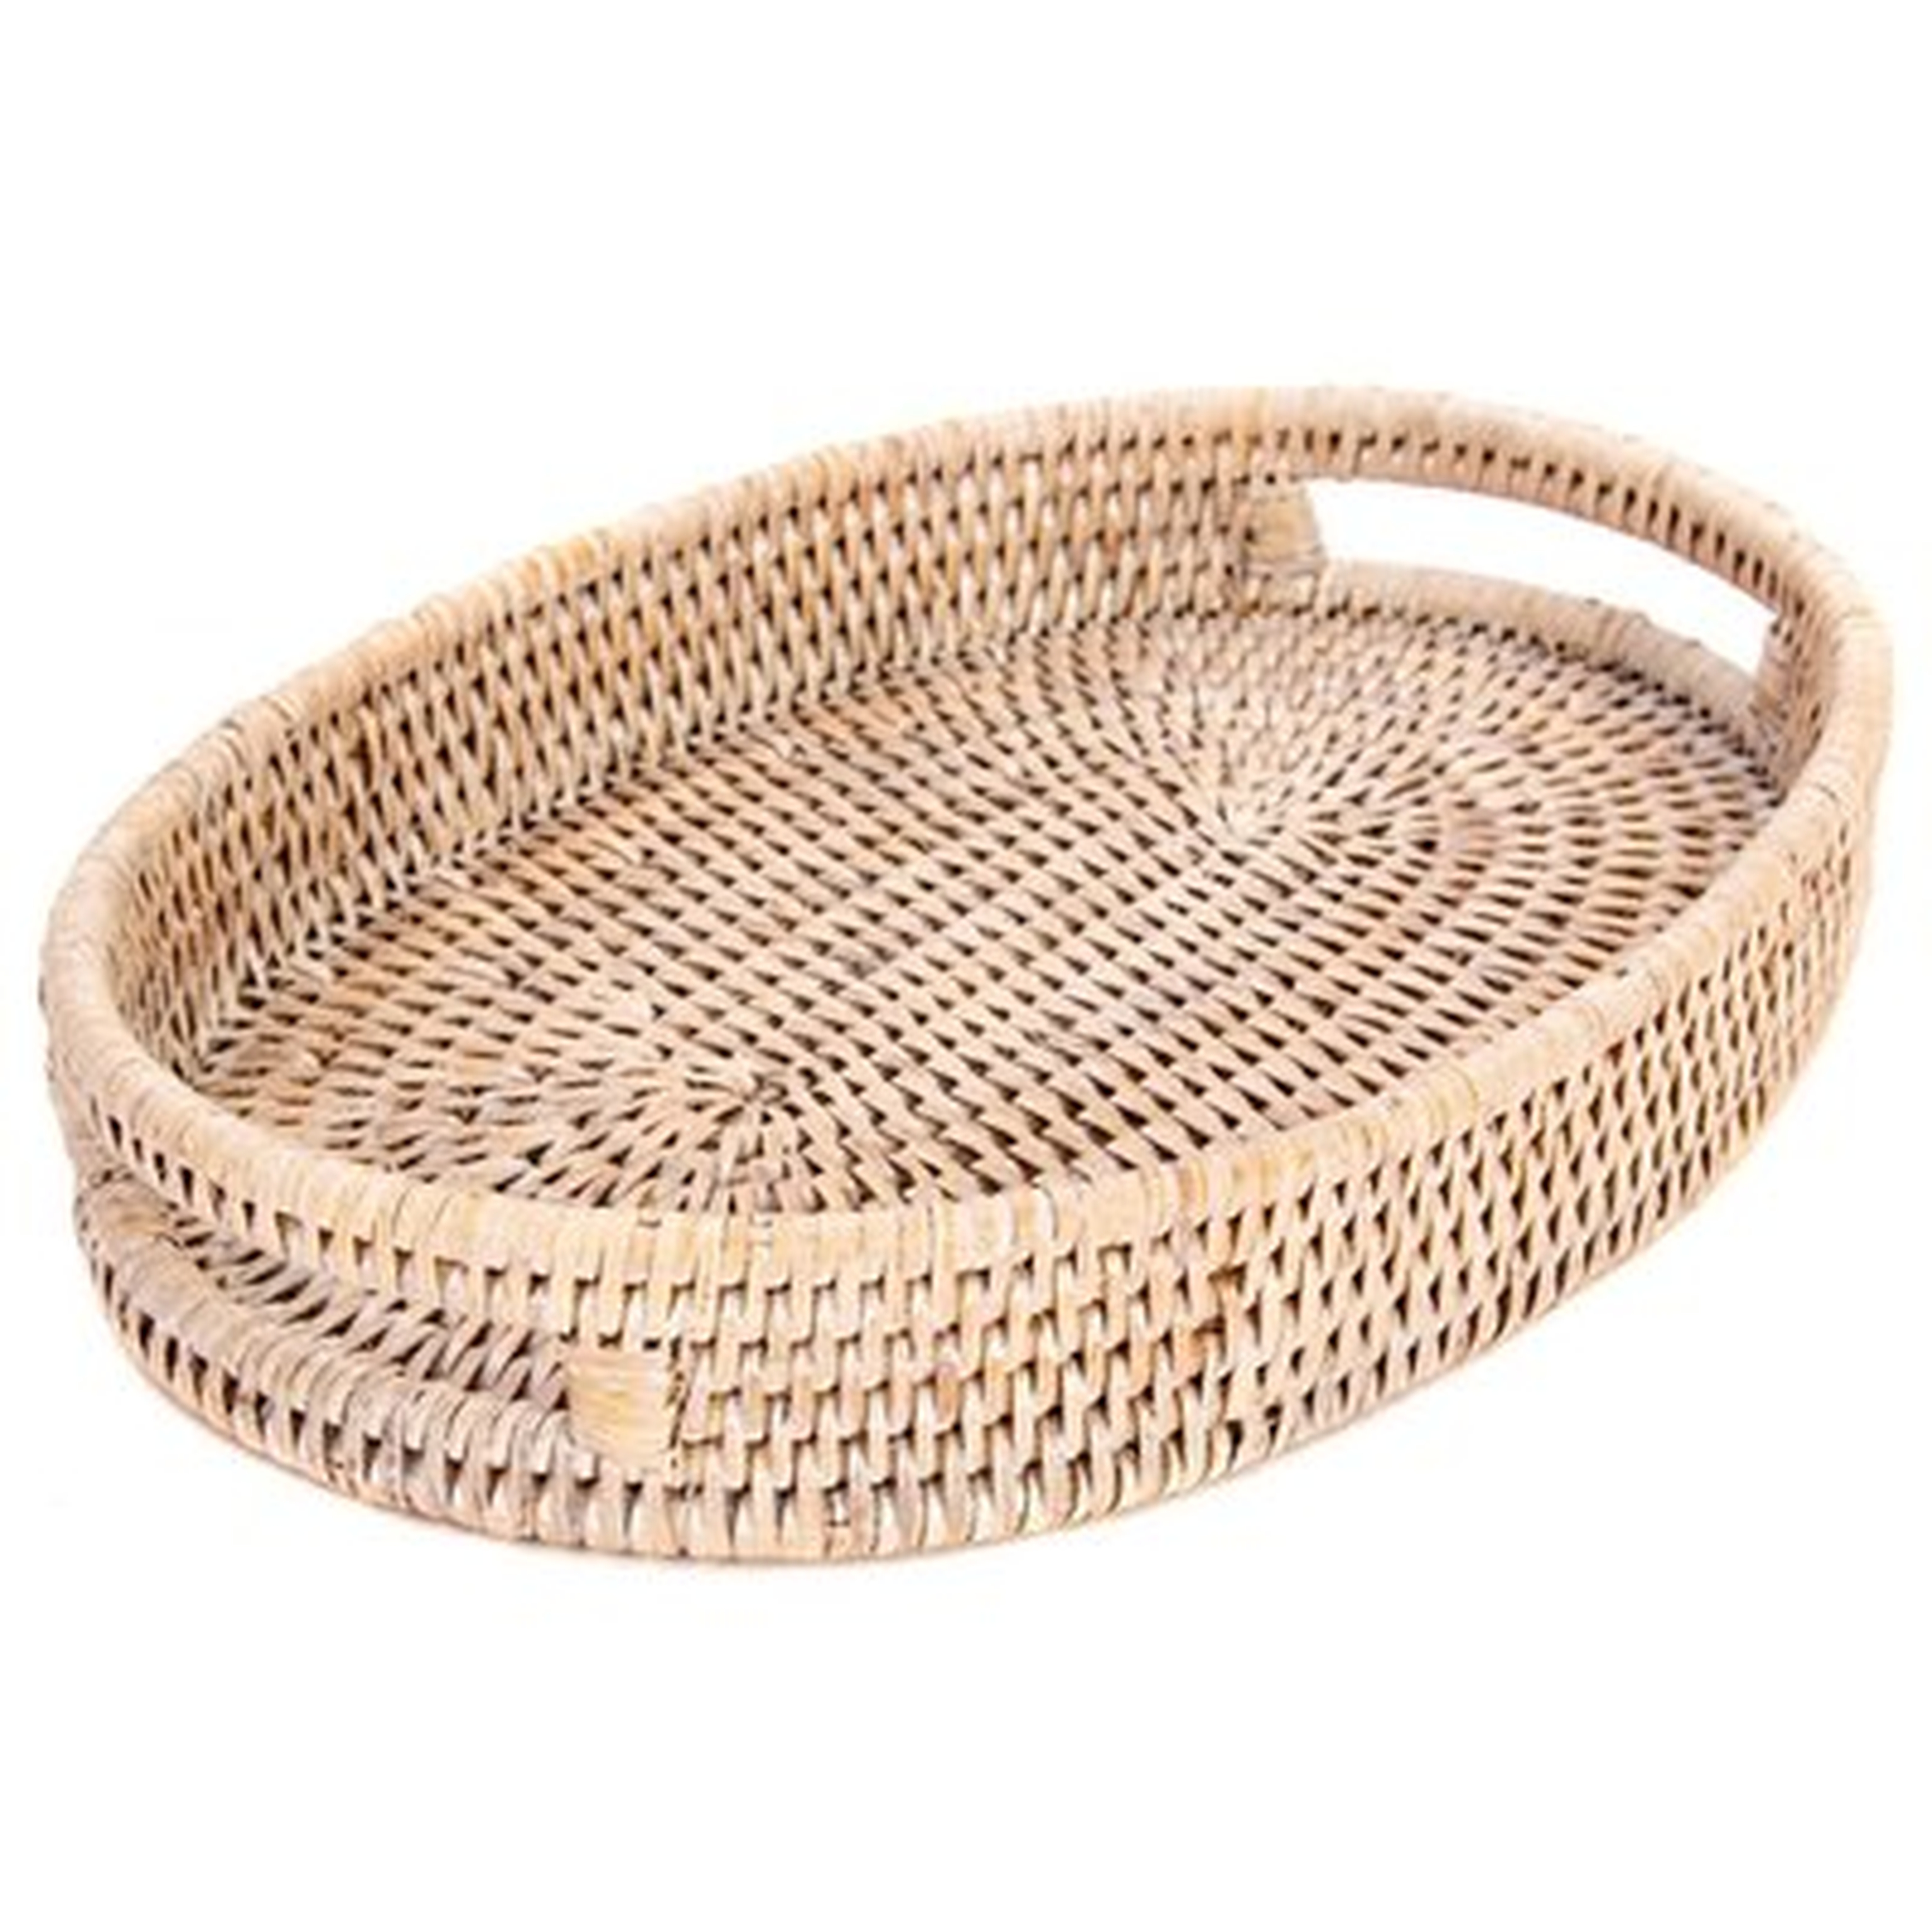 Rattan Oval Tray with Cutout Handles - Birch Lane